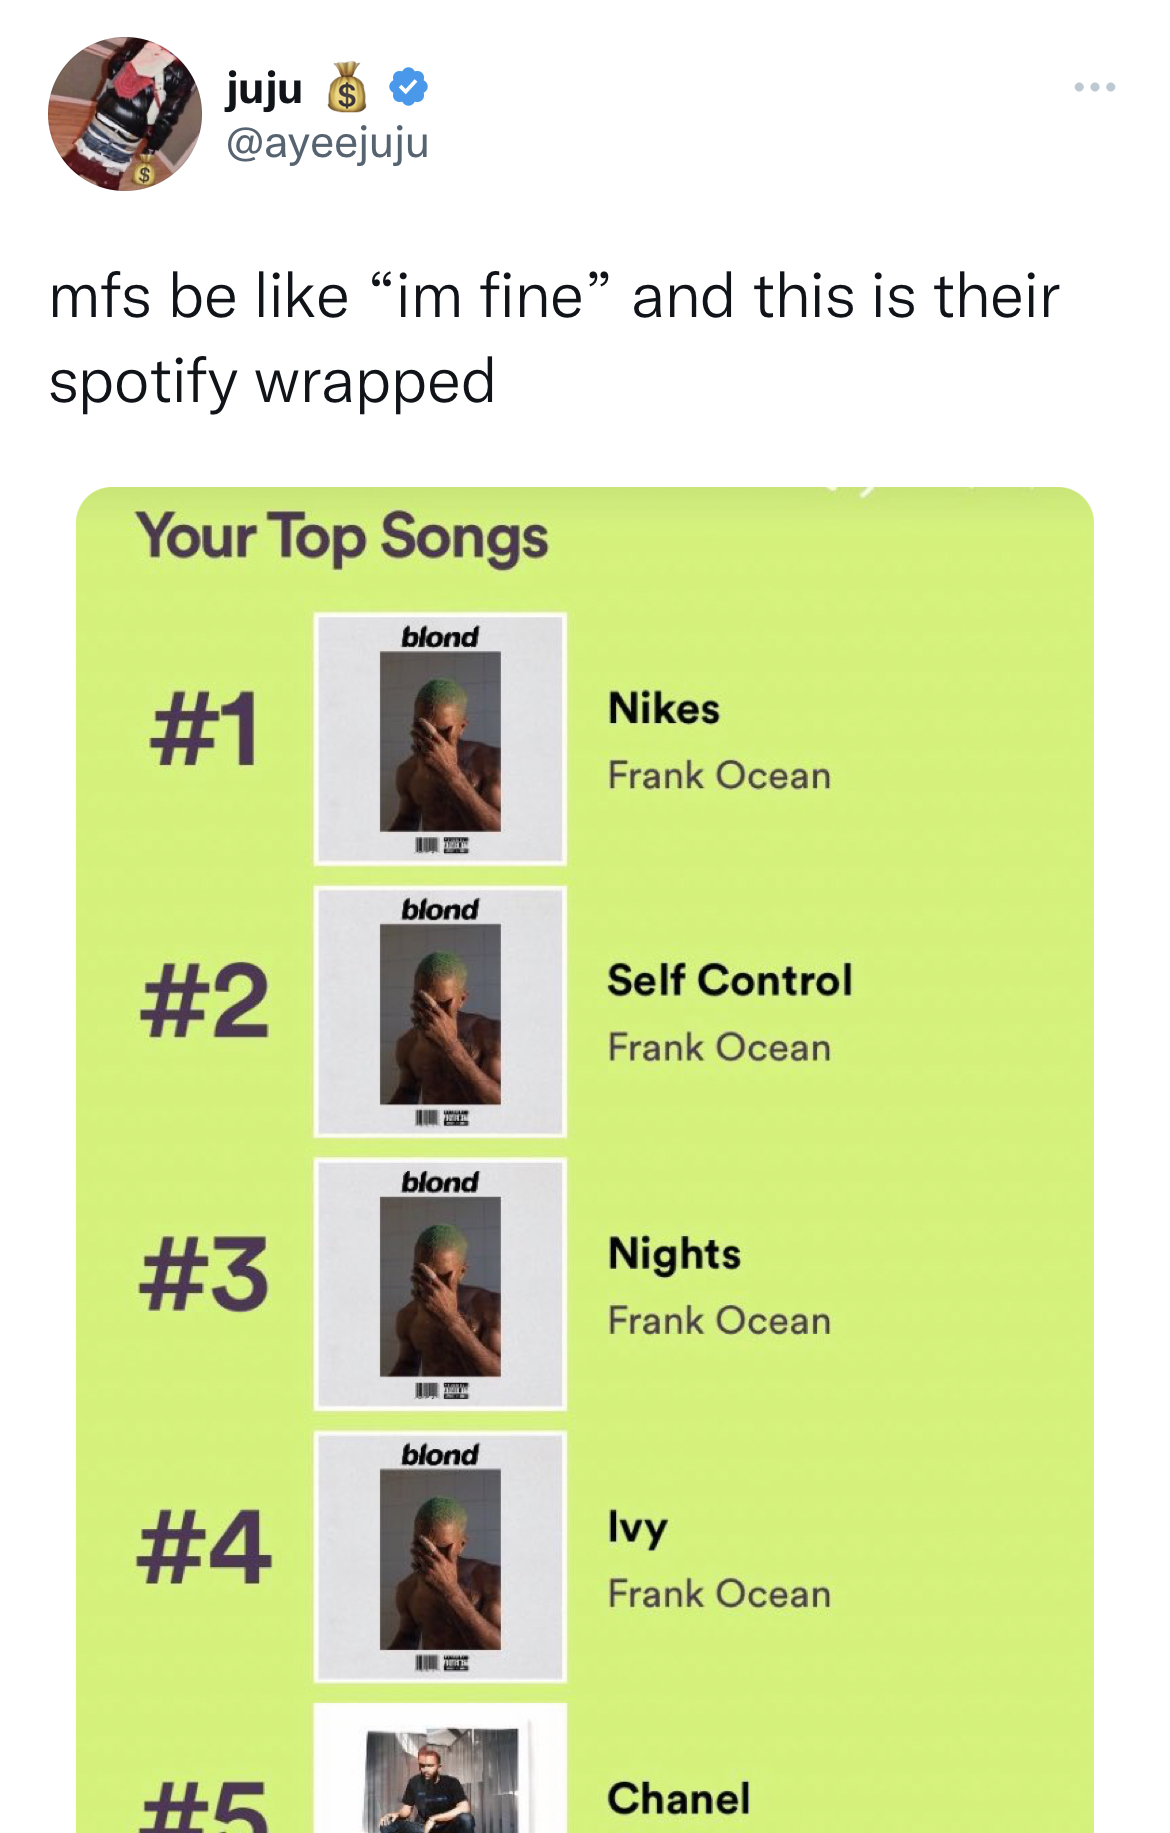 Spotify Wrapped Memes - media - juju mfs be "im fine" and this is their spotify wrapped Your Top Songs blond blond blond blond Nikes Frank Ocean Self Control Frank Ocean Nights Frank Ocean Ivy Frank Ocean Chanel